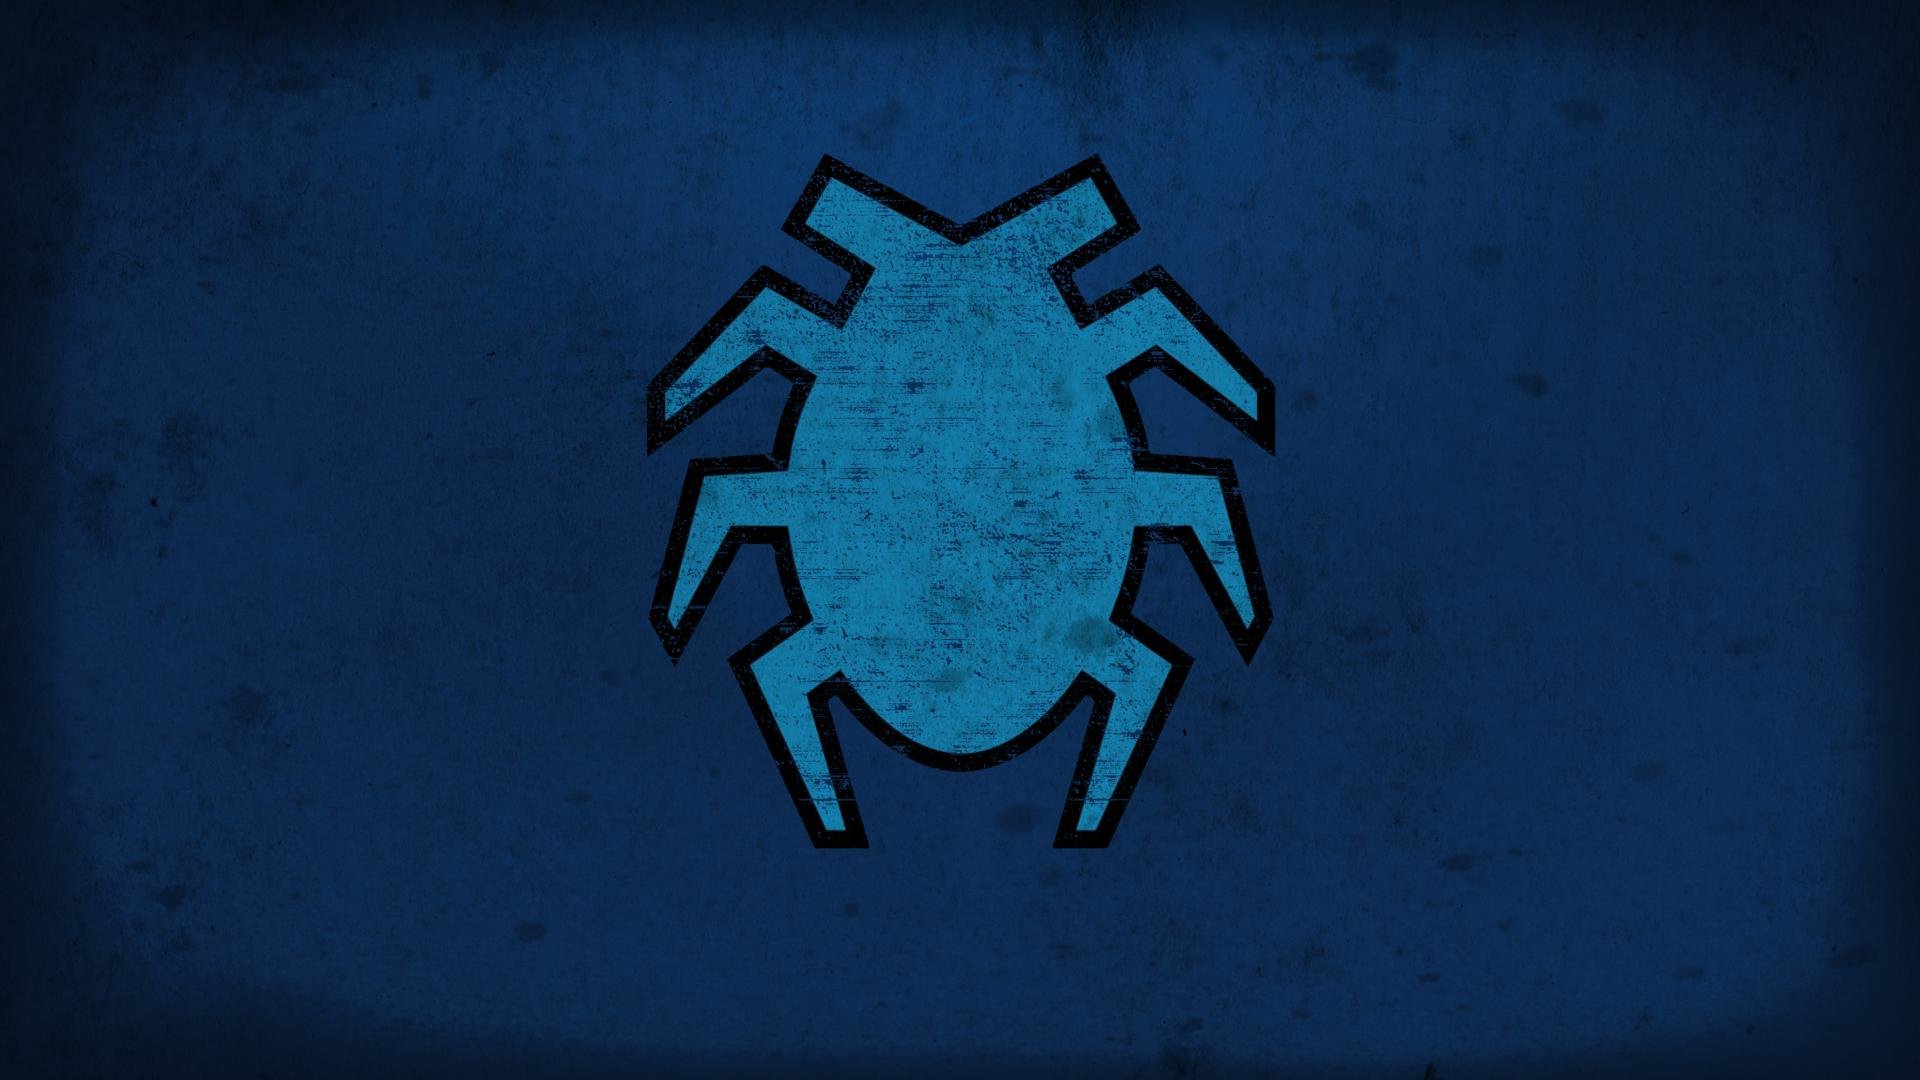 Download hd 1080p Blue Beetle PC background ID:89257 for free